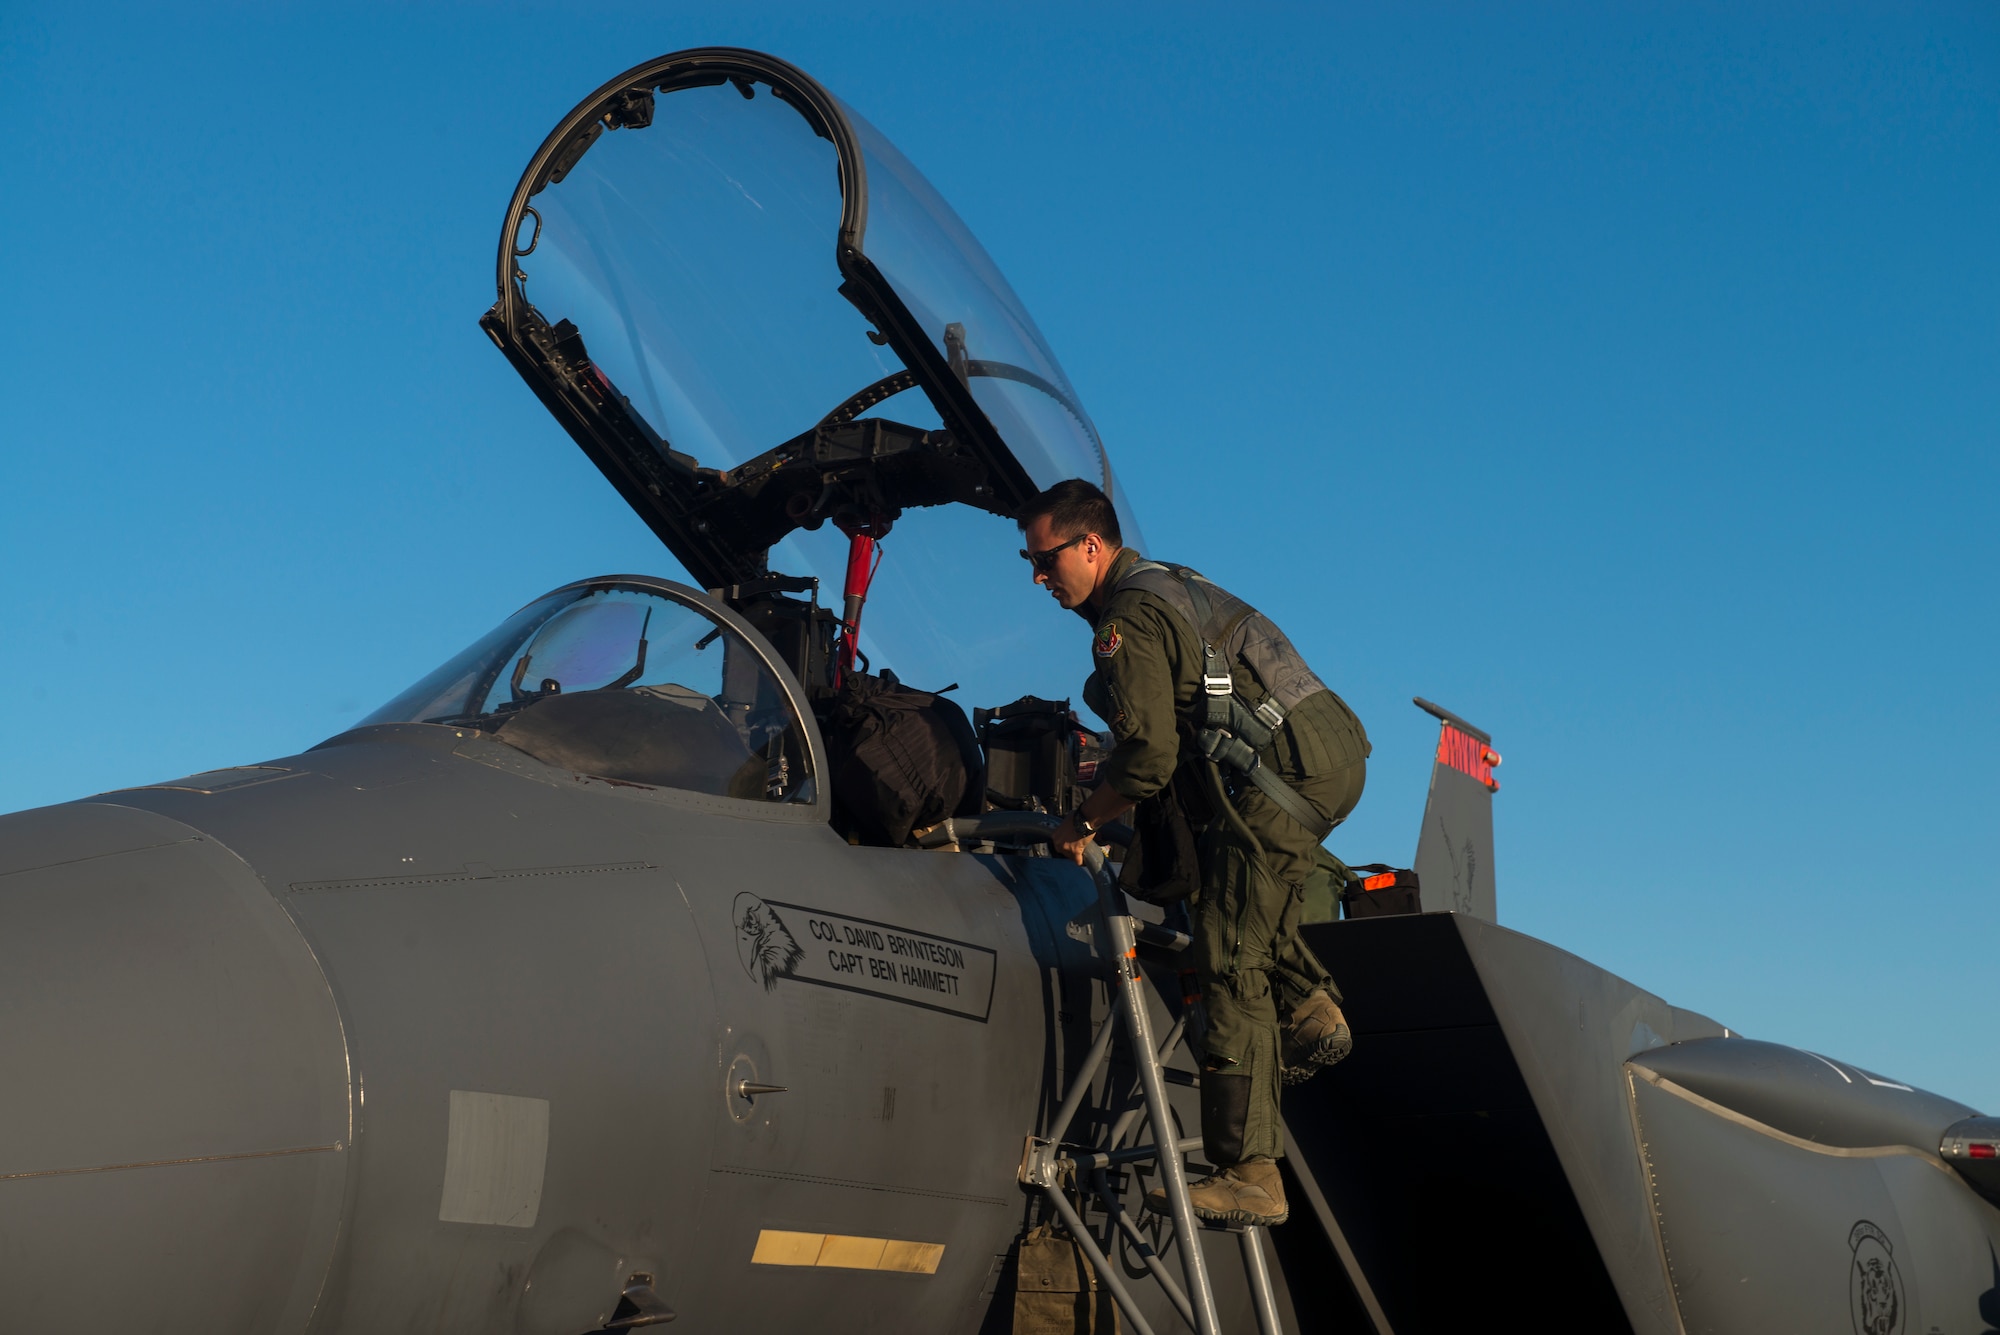 Capt. Jesse Loya, 391st Fighter Squadron pilot, steps into an F-15E Strike Eagle during Green Flag West, June 13, 2018, at Nellis Air Force Base, Nev. The 391st FS participated in the Green Flag exercise to enhance readiness by training on Close Air Support over the National Training Center, Fort Irwin, Calif. (U.S. Air Force photo by Airman 1st Class JaNae Capuno)